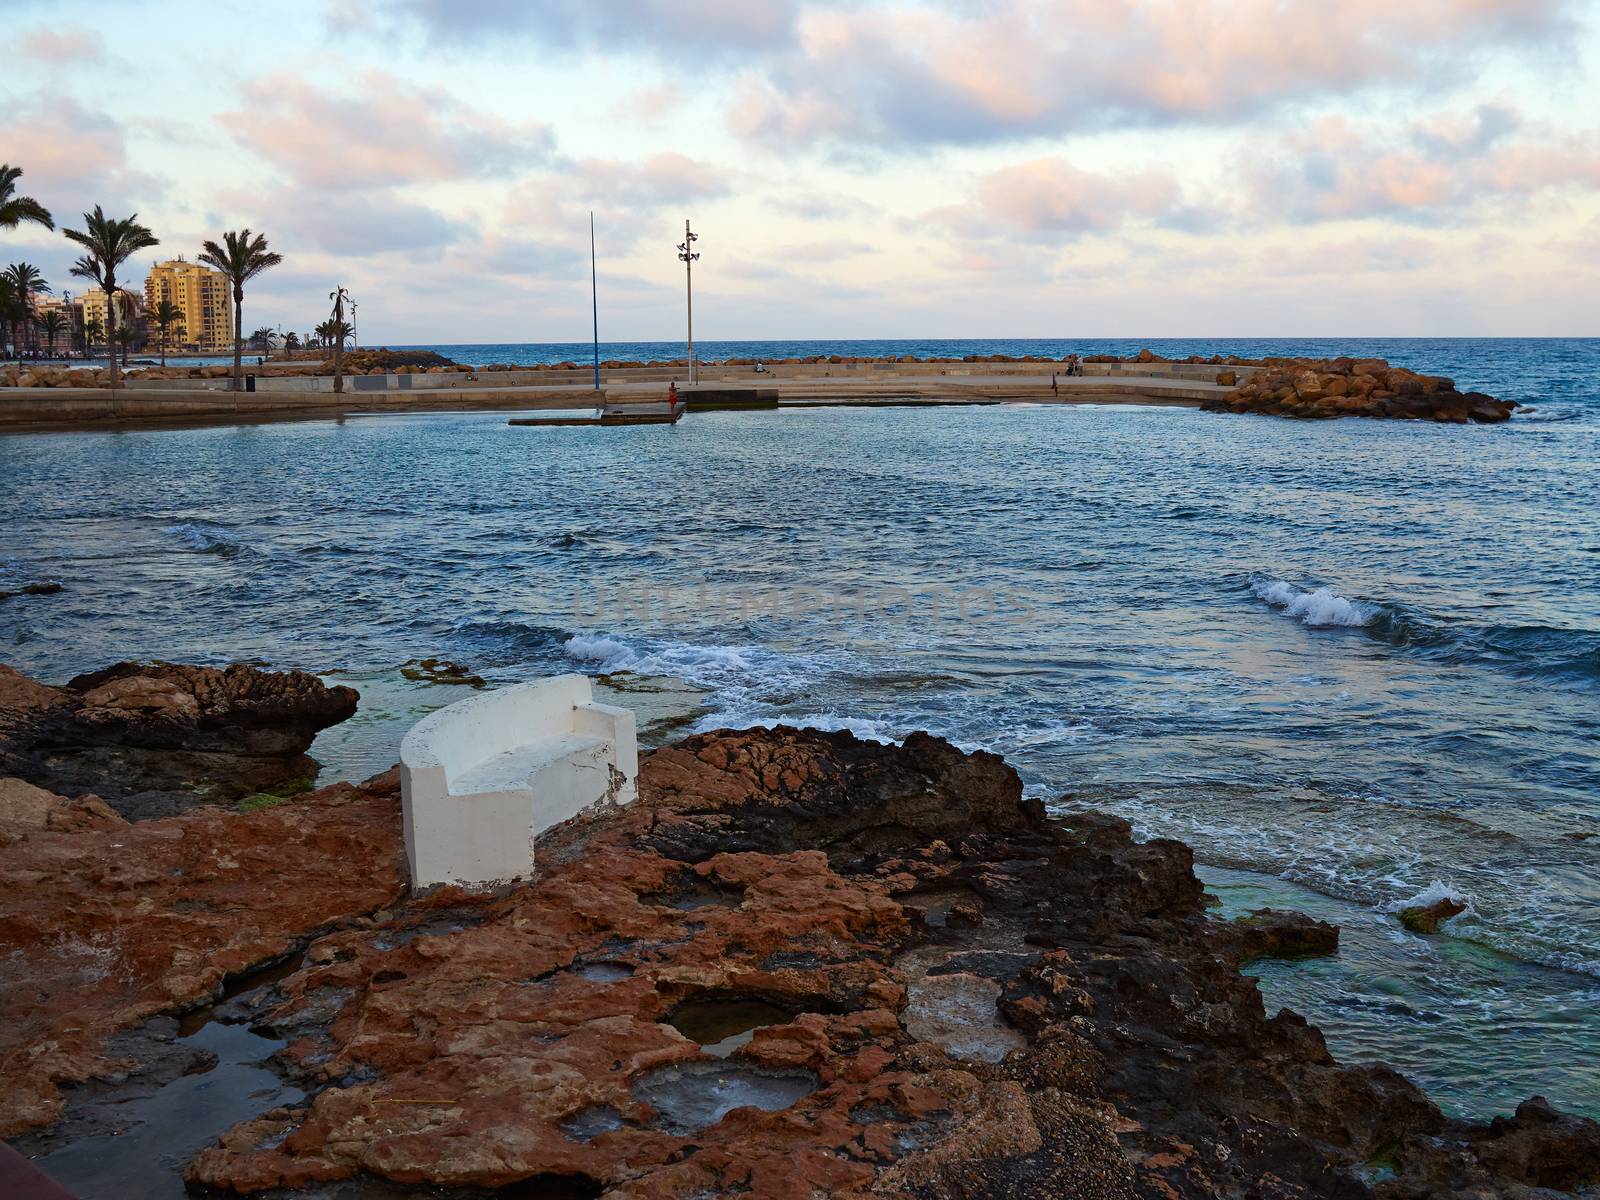 Bench made of stone in beautiful Torrevieja beach, Costa Blanca, by Ronyzmbow